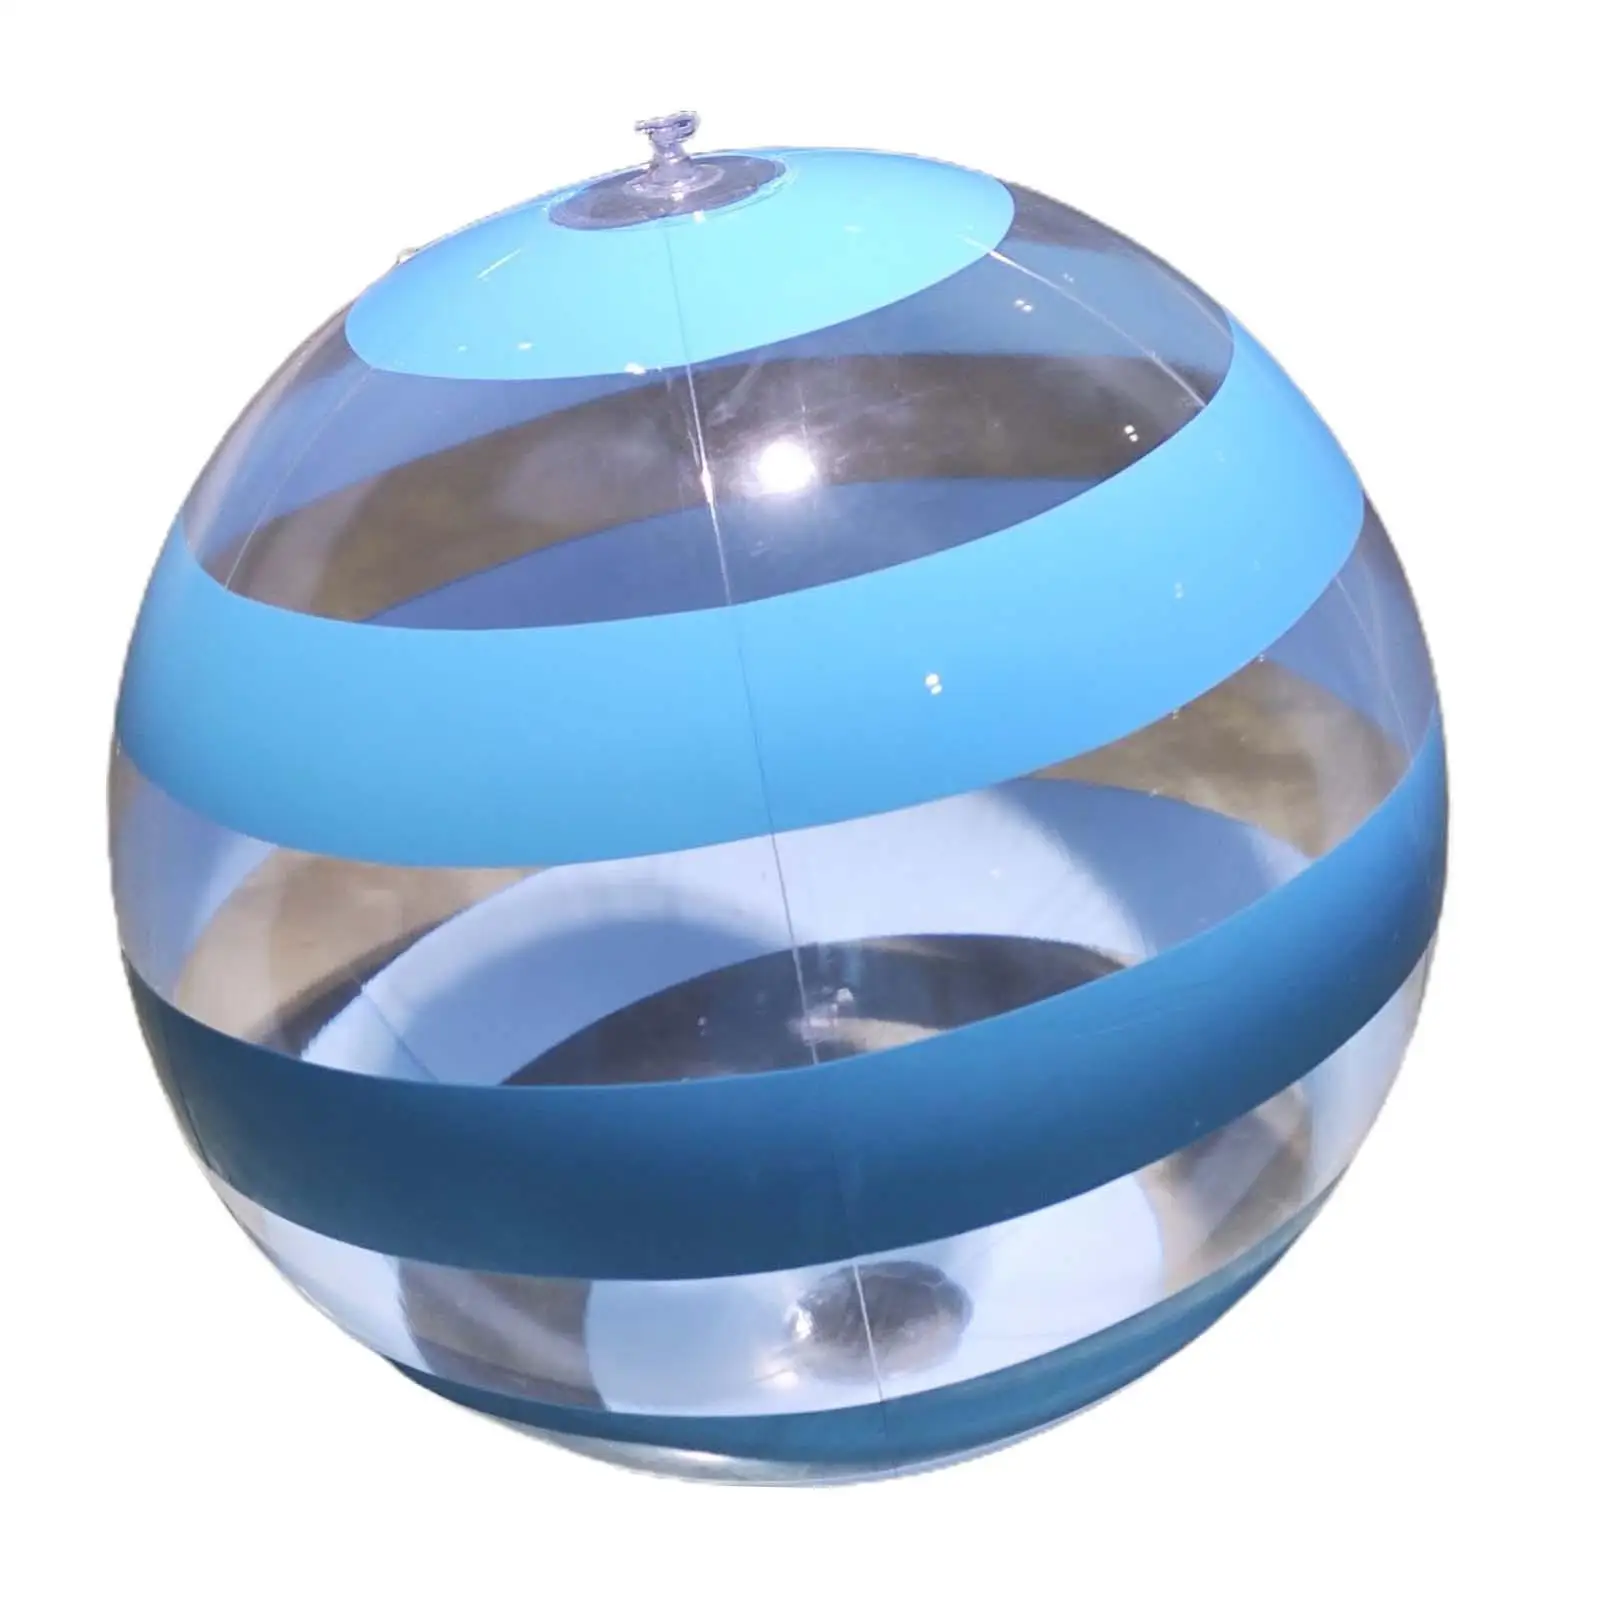 Swimming Pool Balls Multipurpose PVC Party Favor Pool Game Summer Water Games Blow Balls for Lake Pool Party Holiday